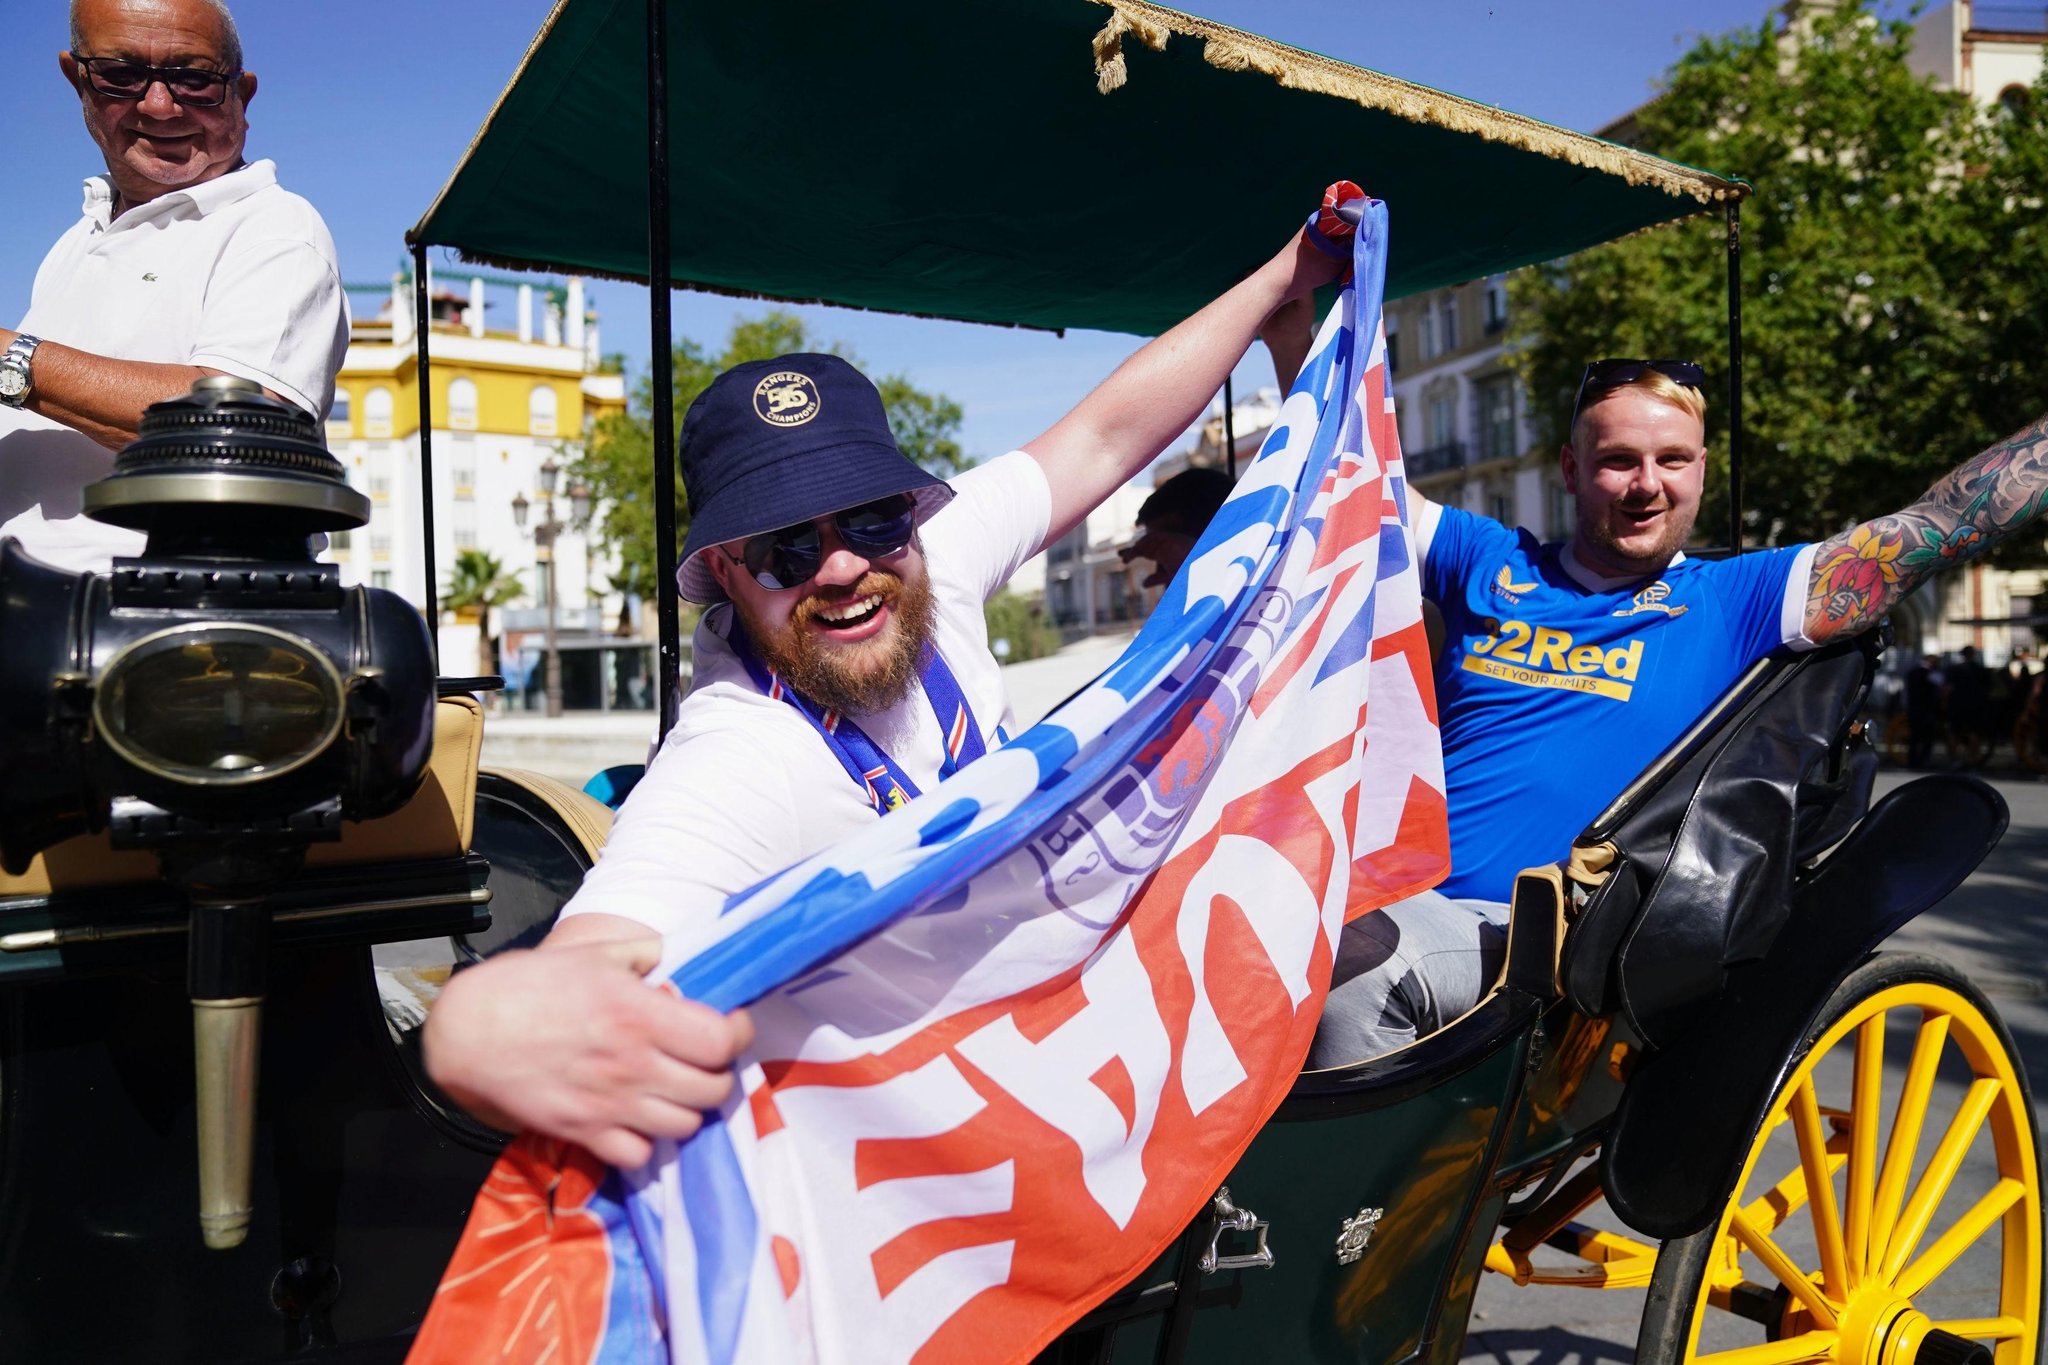 In Pictures: Rangers fans get ready for the big Europa League final in Seville